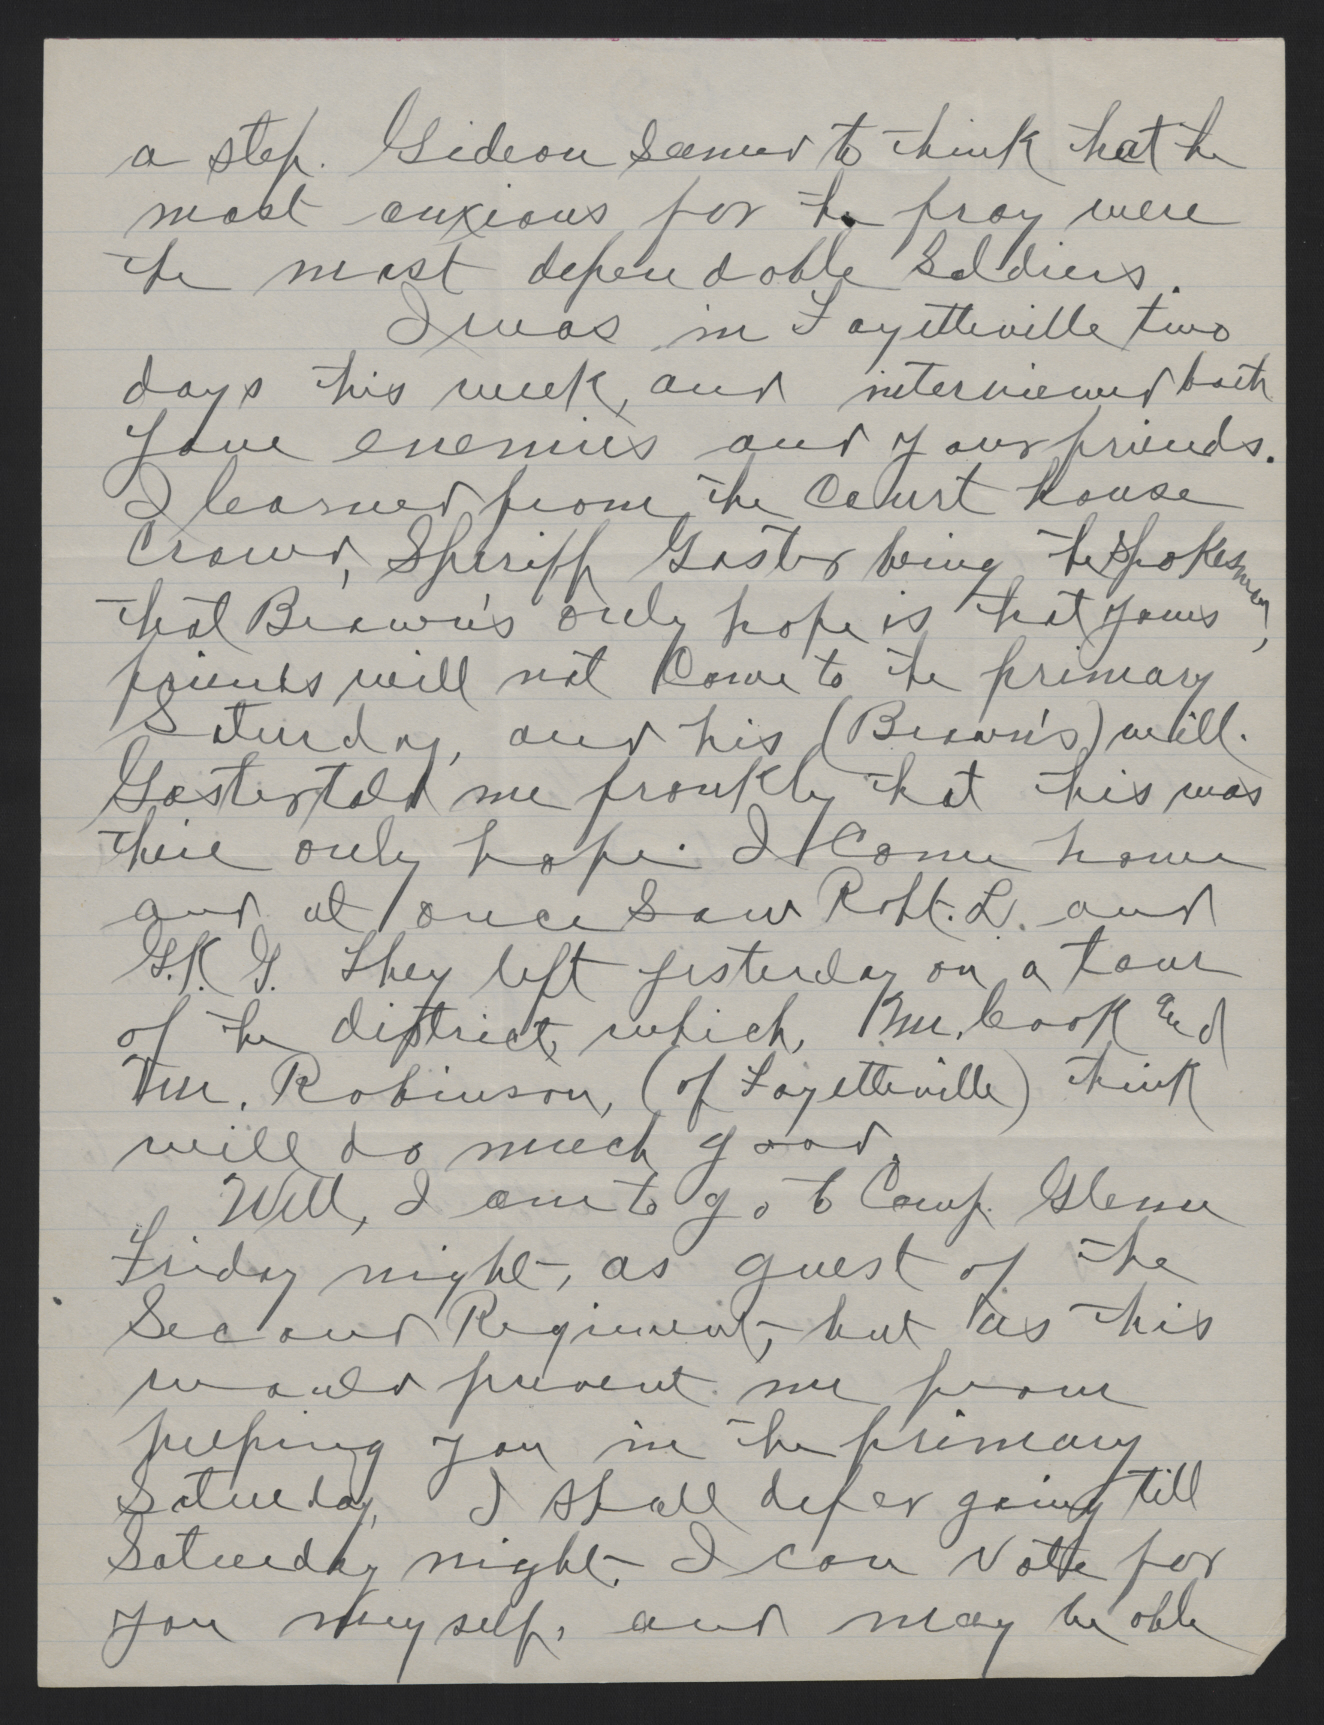 Letter from Denning to Godwin, June 28, 1916, page 2